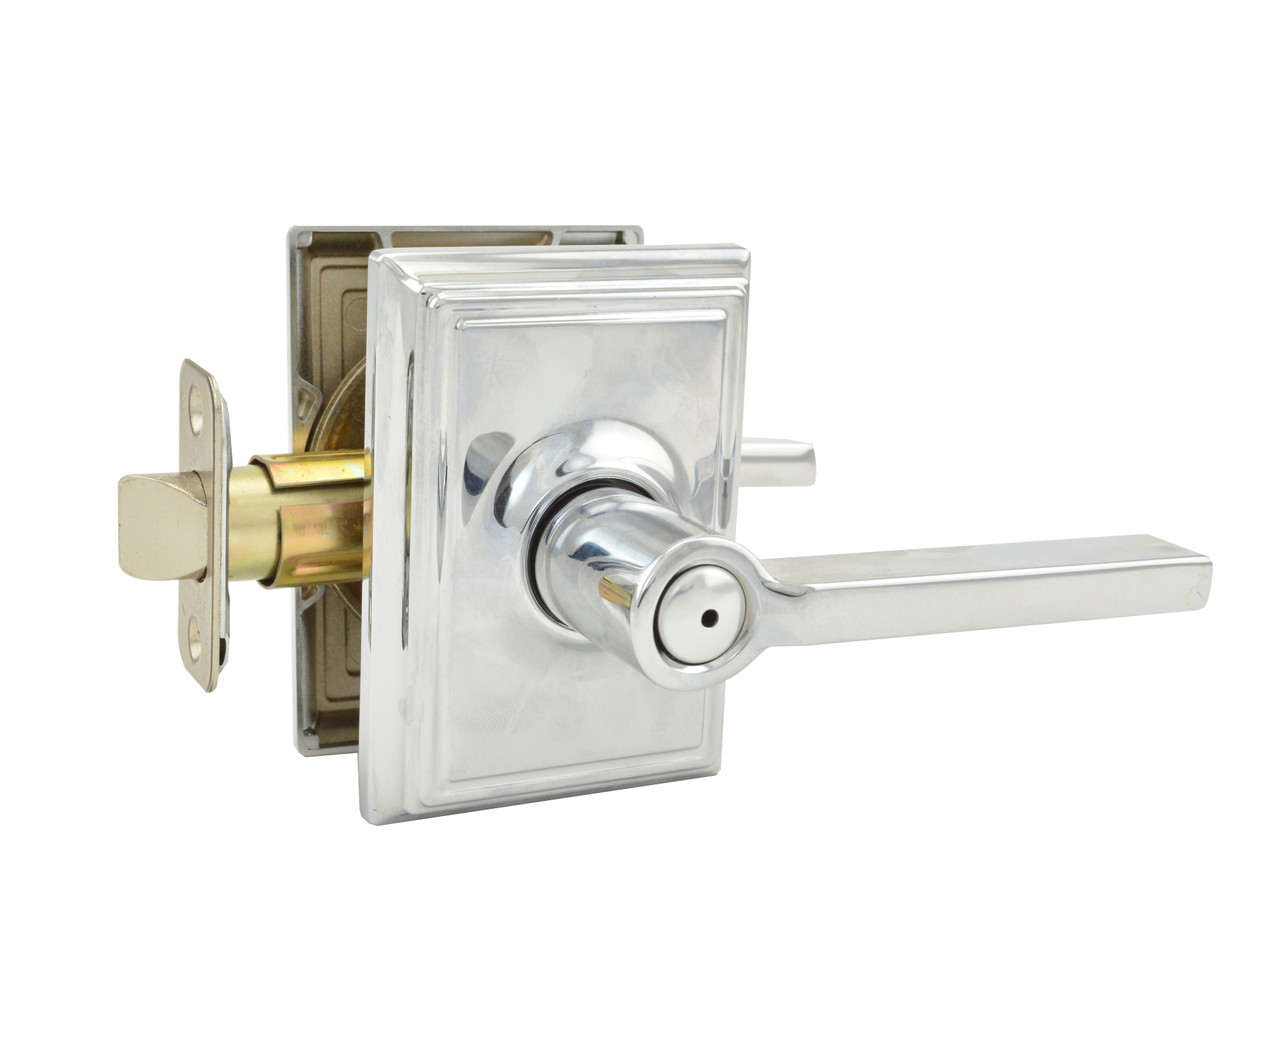 Schlage Residential F40 Privacy Latch Grade Cylindrical Non-Keyed Lock